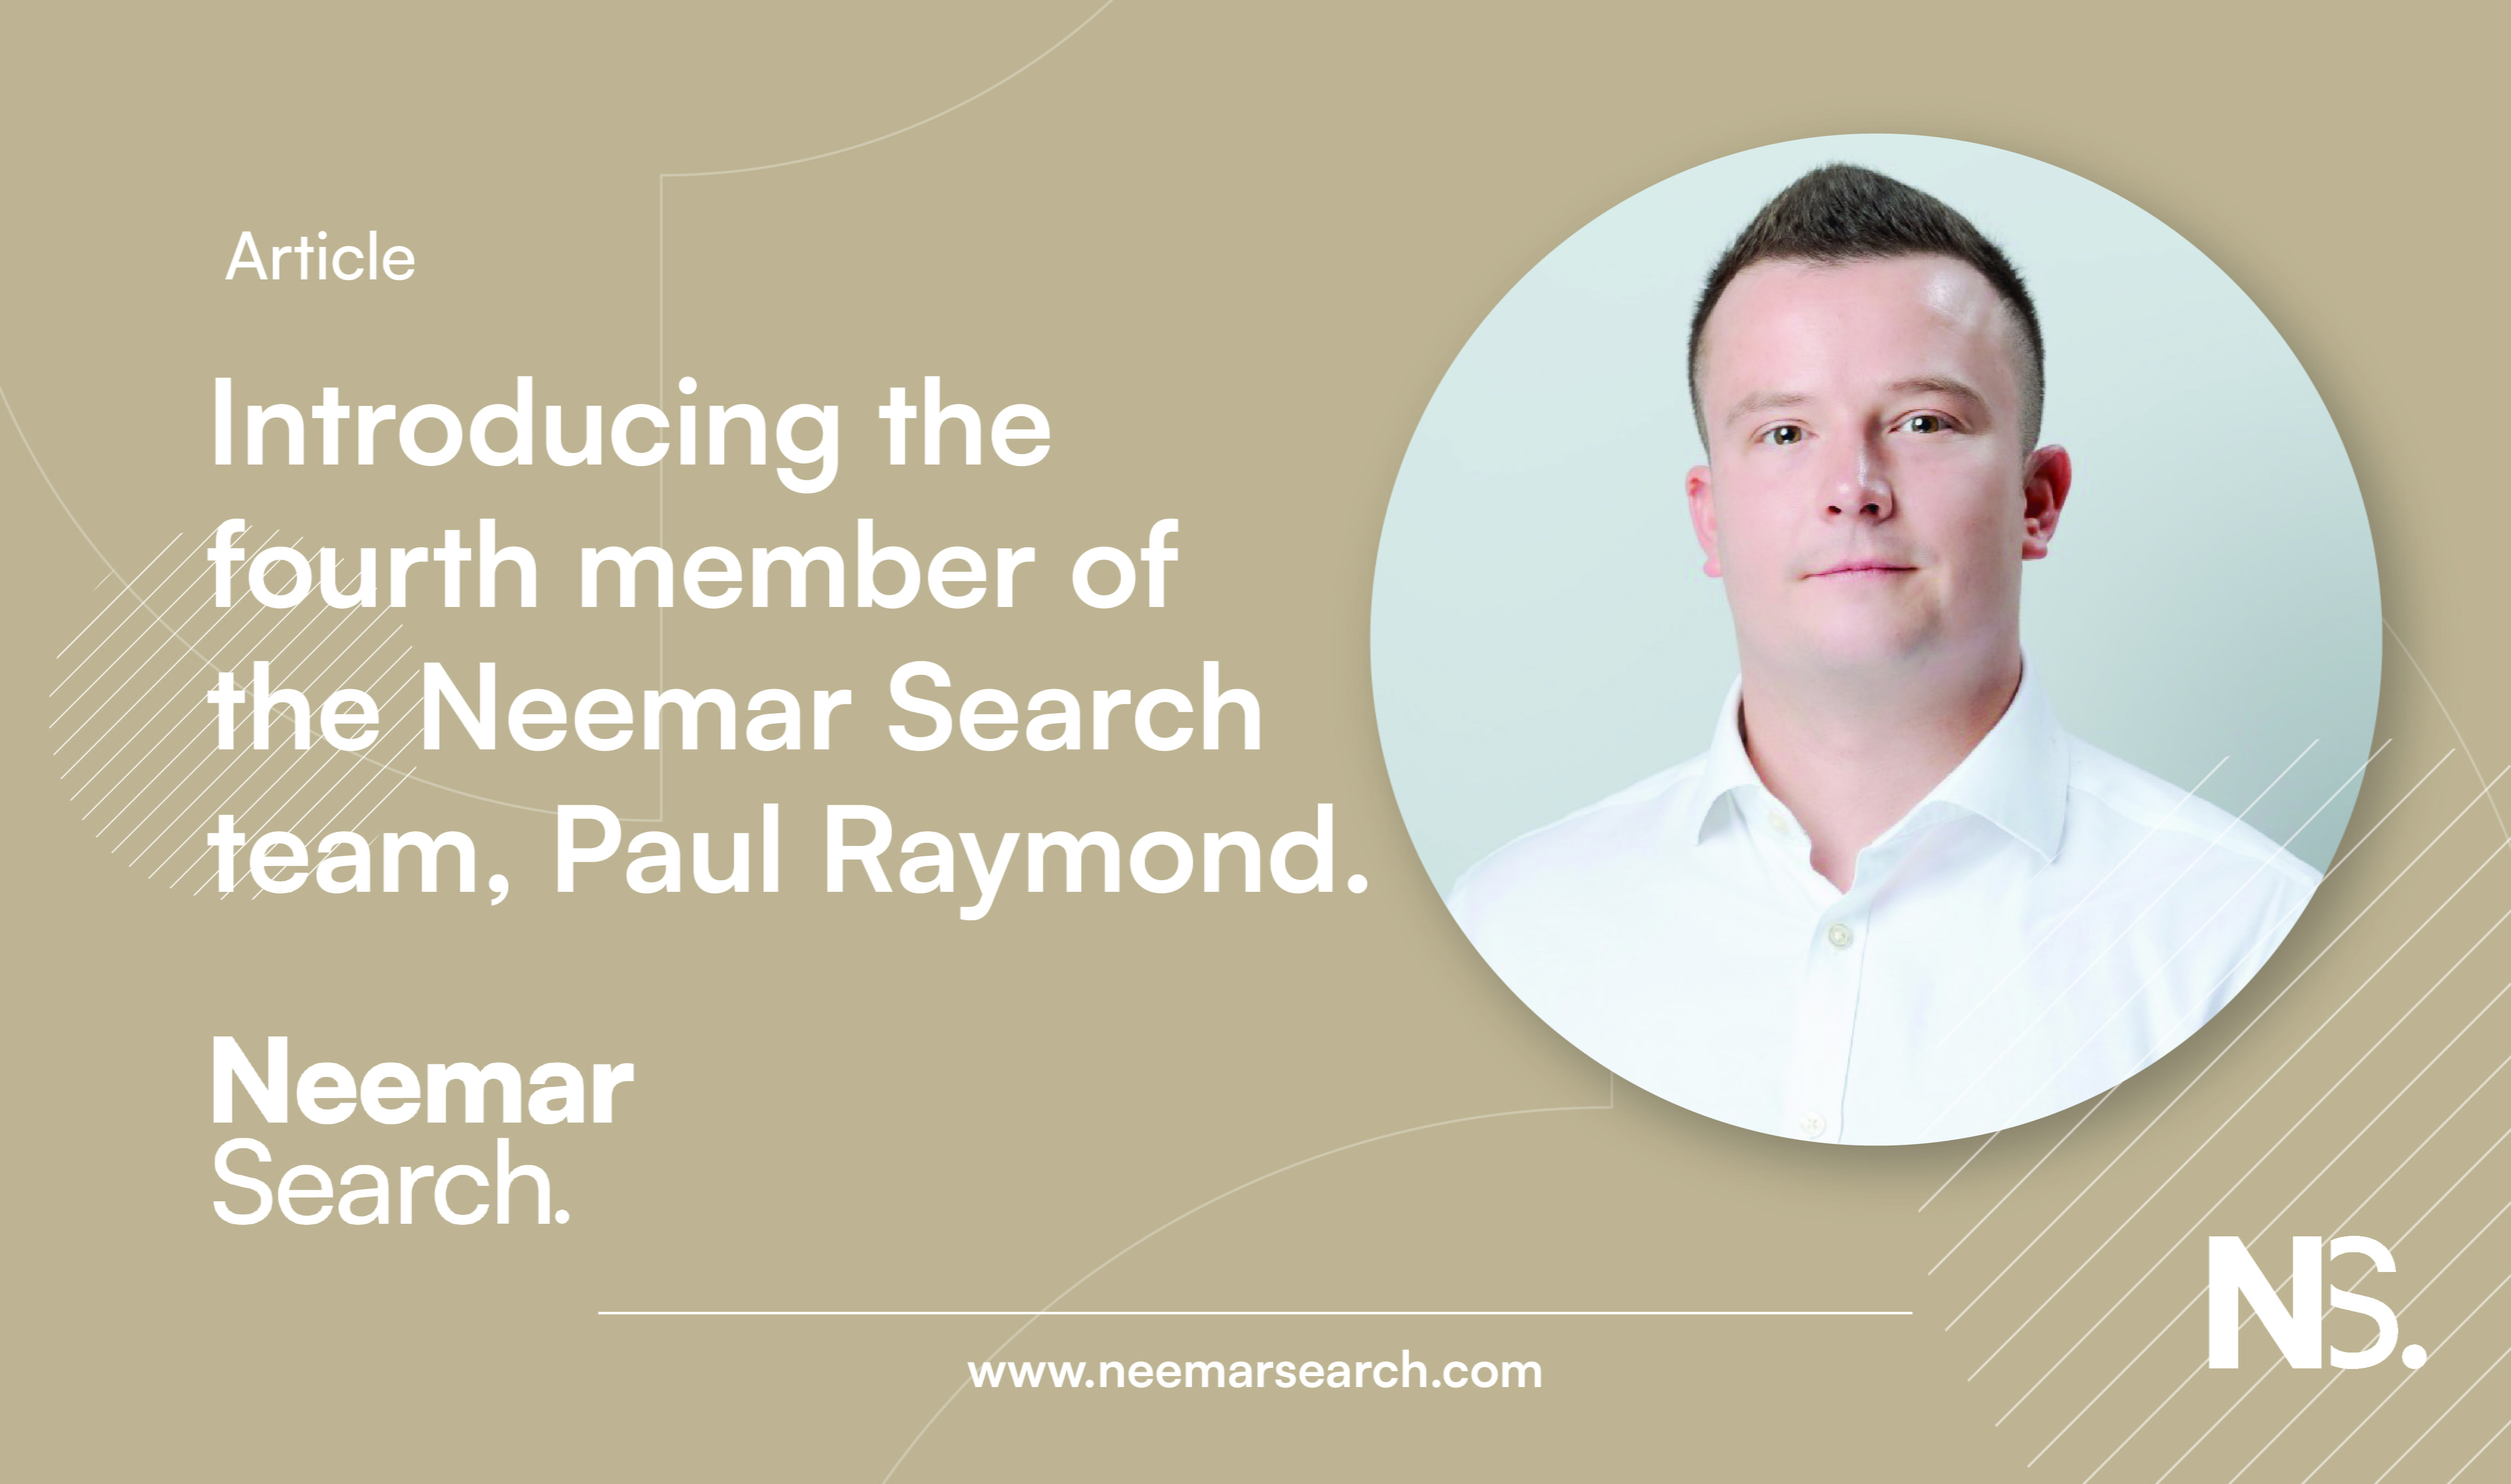  Introducing the fourth member of the Neemar Search team, Paul Raymond.